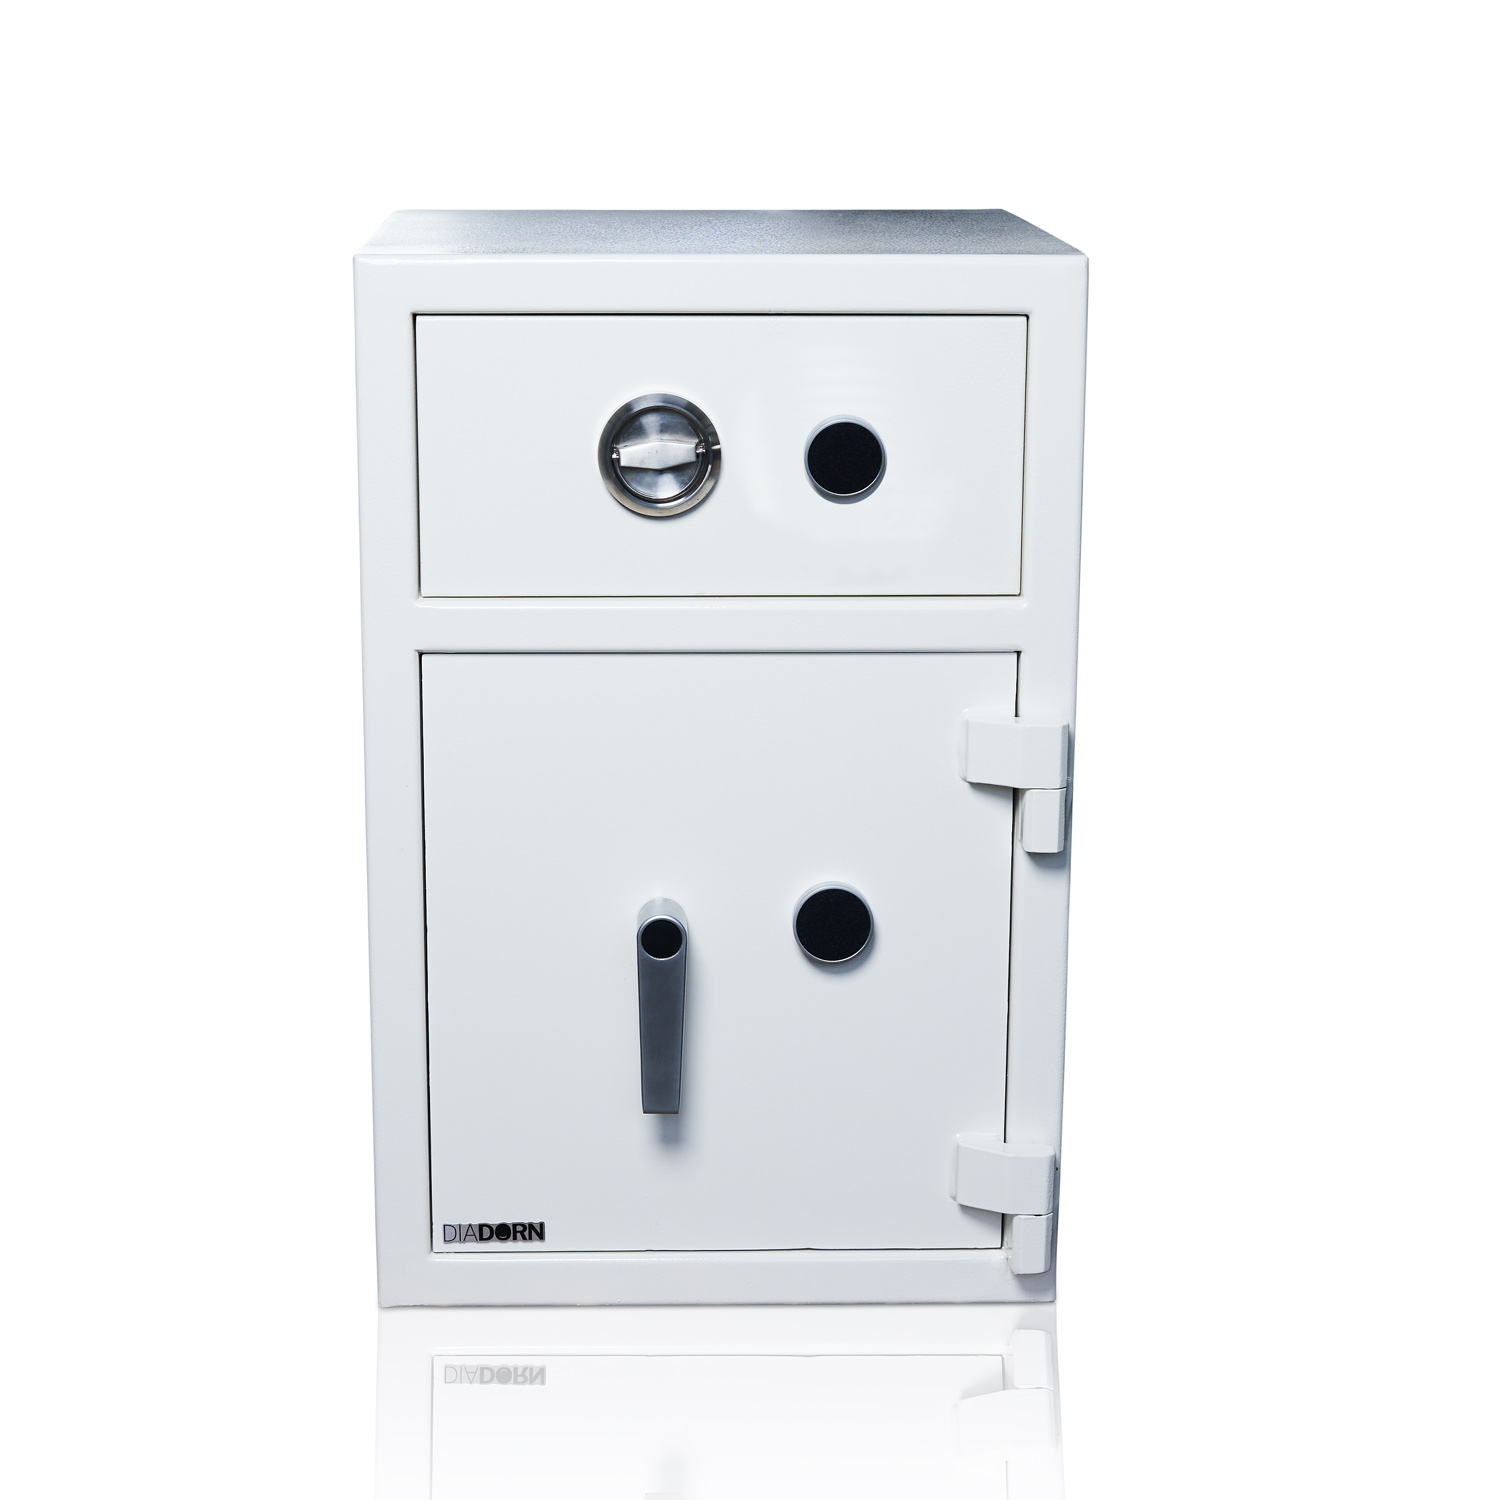 Deposit safe with drawer and key lock | Safe door with 6 locking bolts & key lock